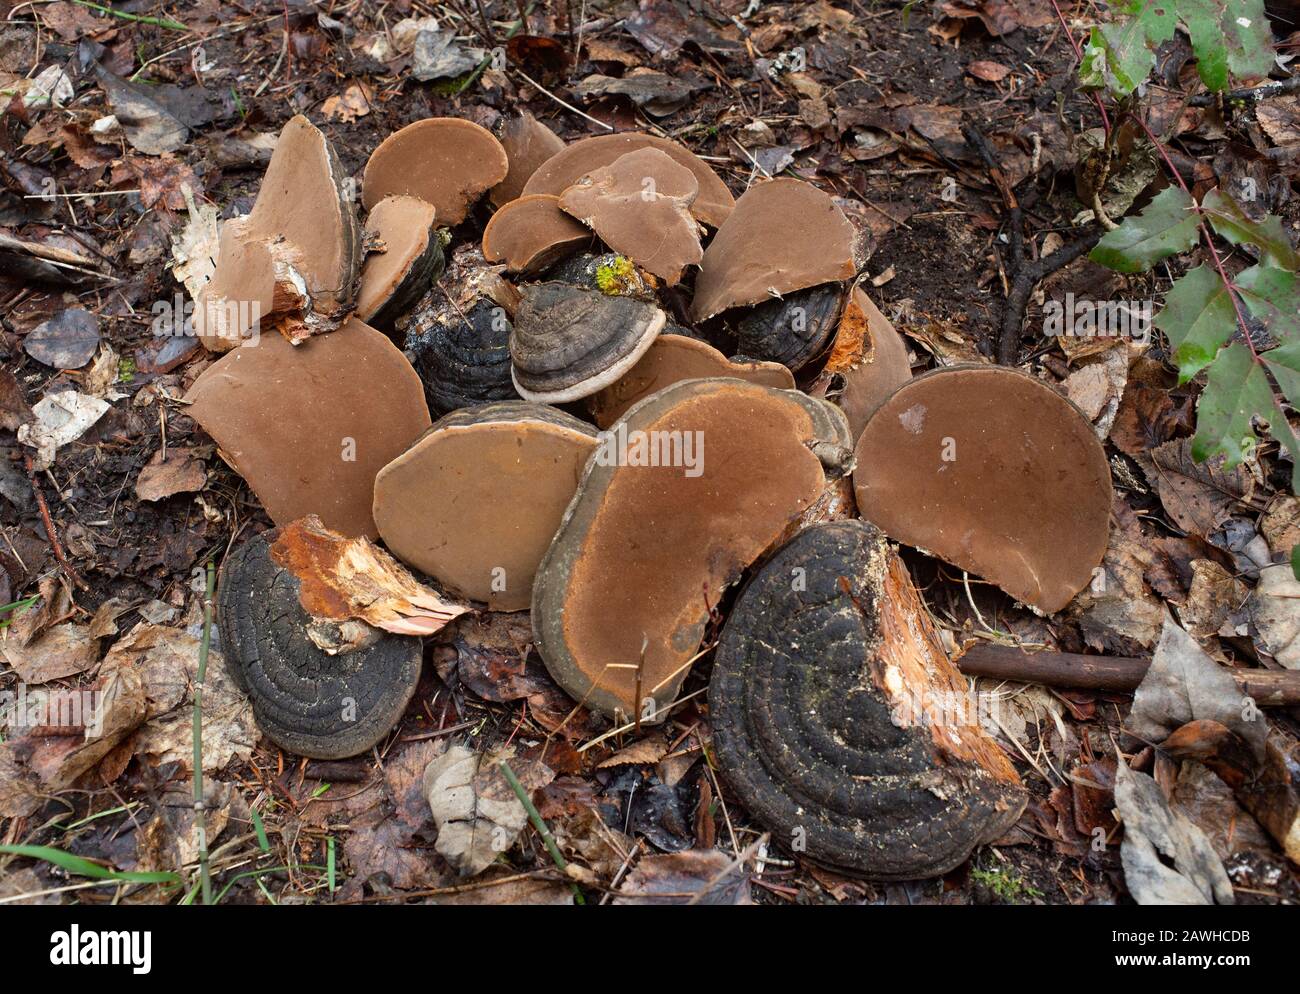 Black Bristle Bracket mushrooms (Phellinus nigricans) collected from the trunk of a dead paper birch tree (Betula papyrifera), in Troy, Montana. Stock Photo